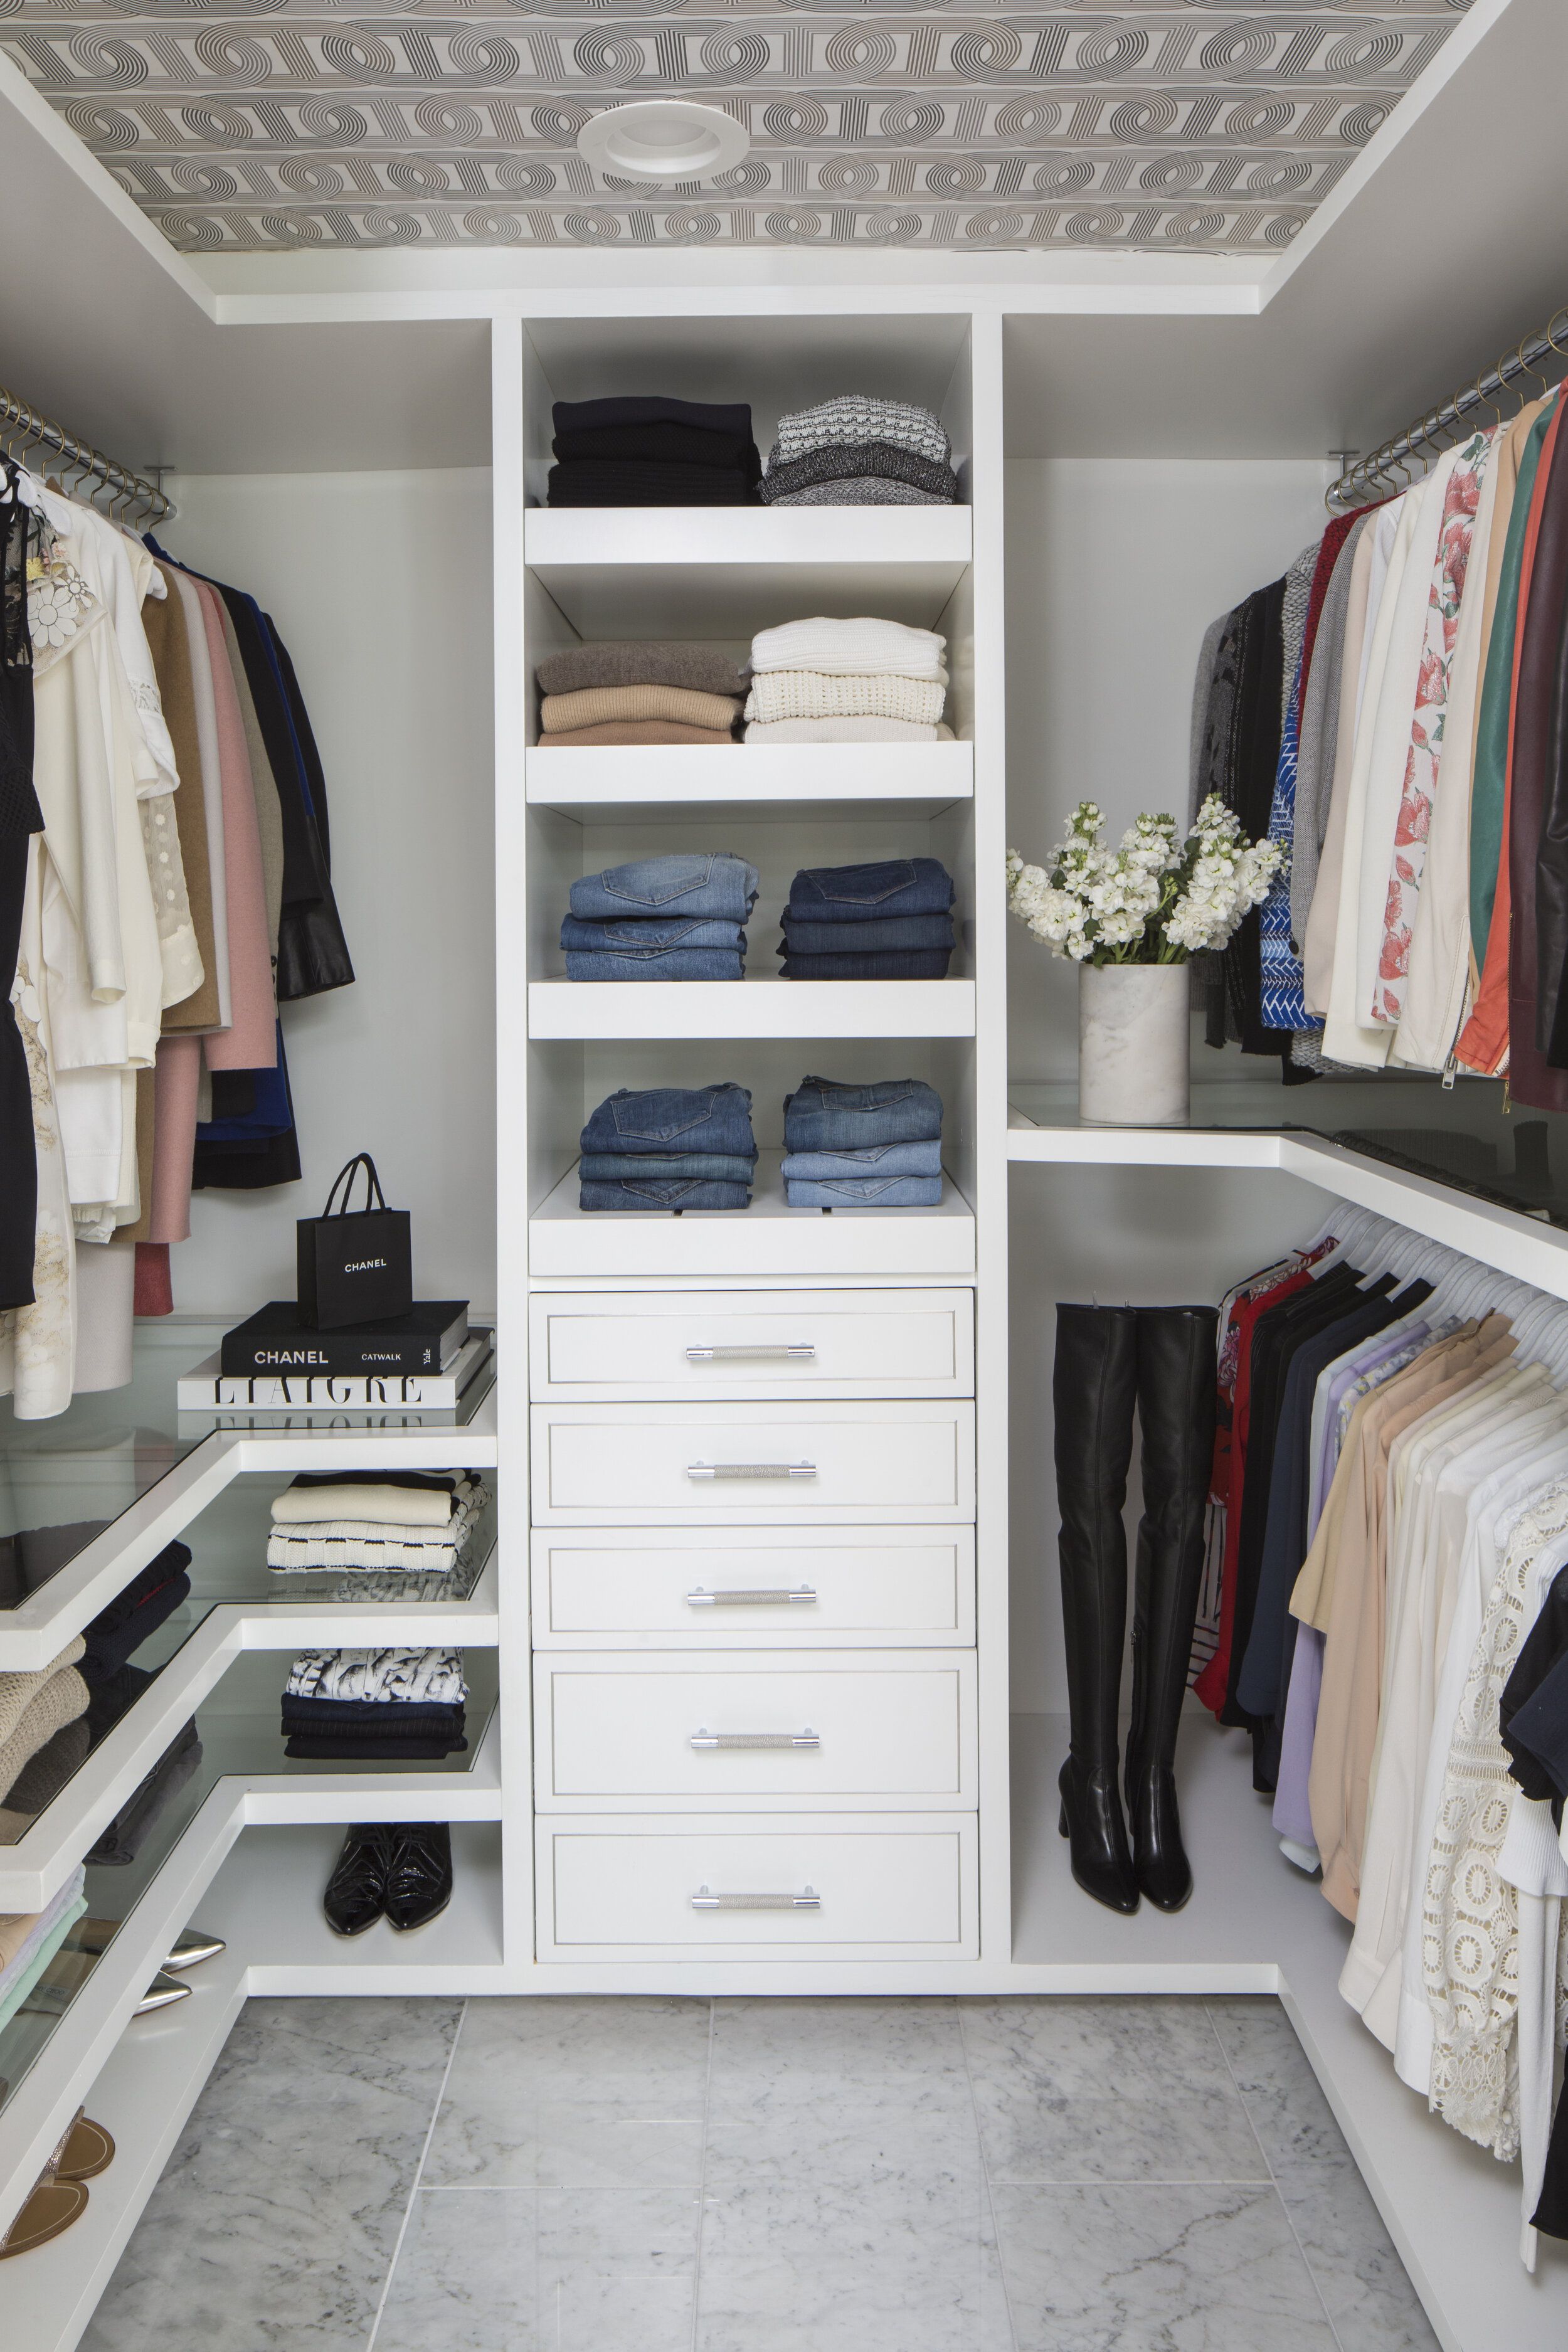 7 Latest Trends in Modern Walk-In Closet Ideas and Designs